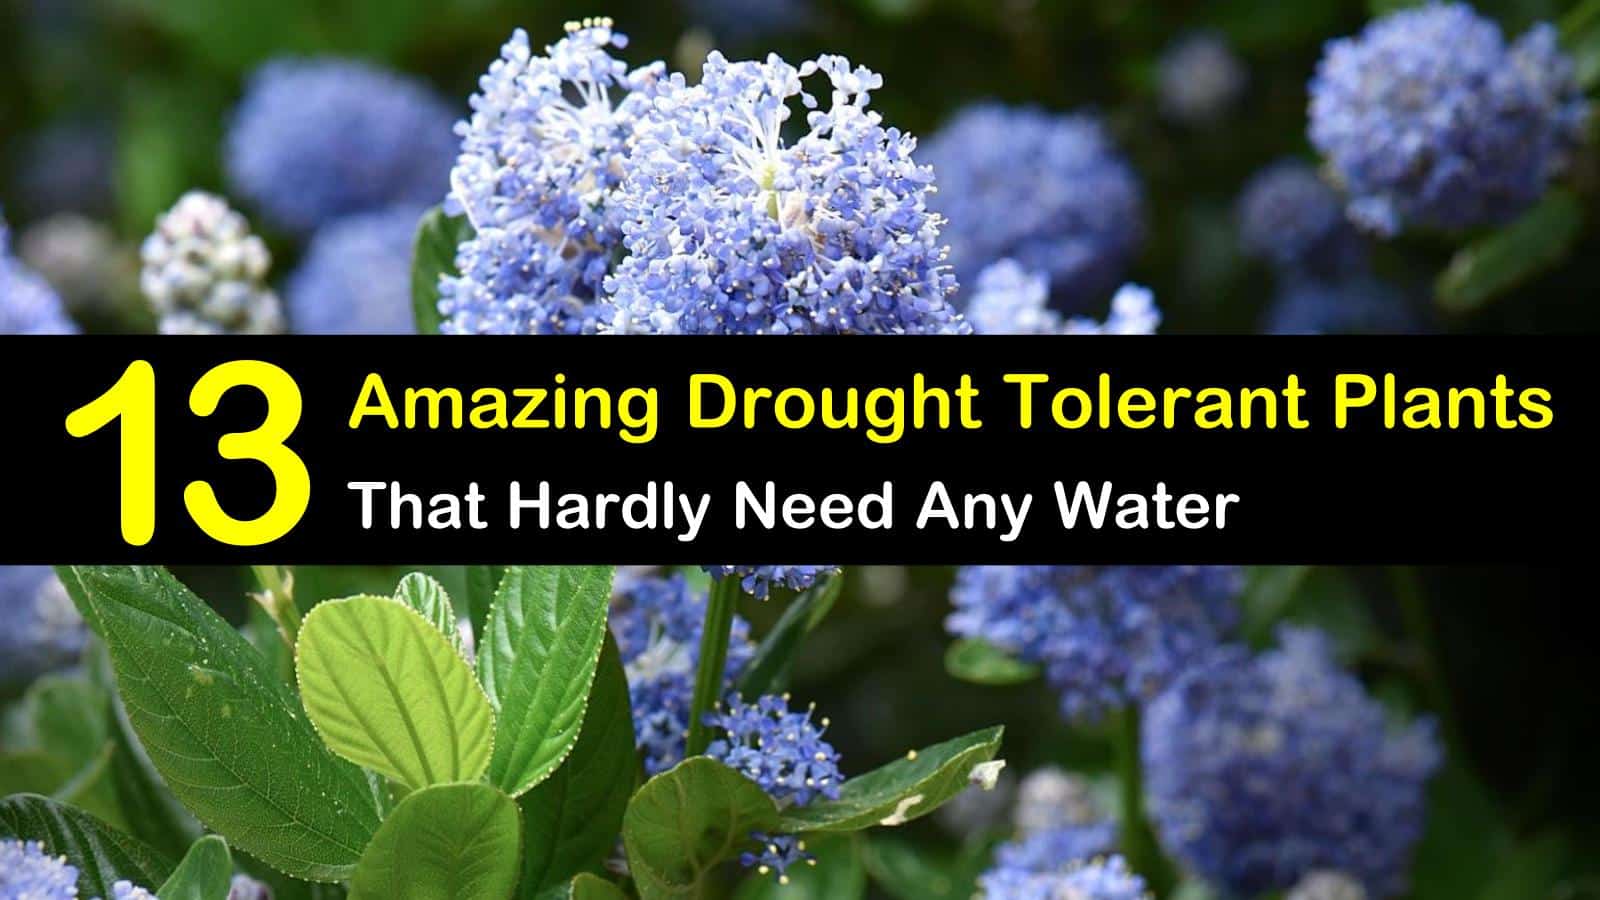 13 Amazing Drought Tolerant Plants that Hardly Need Any Water